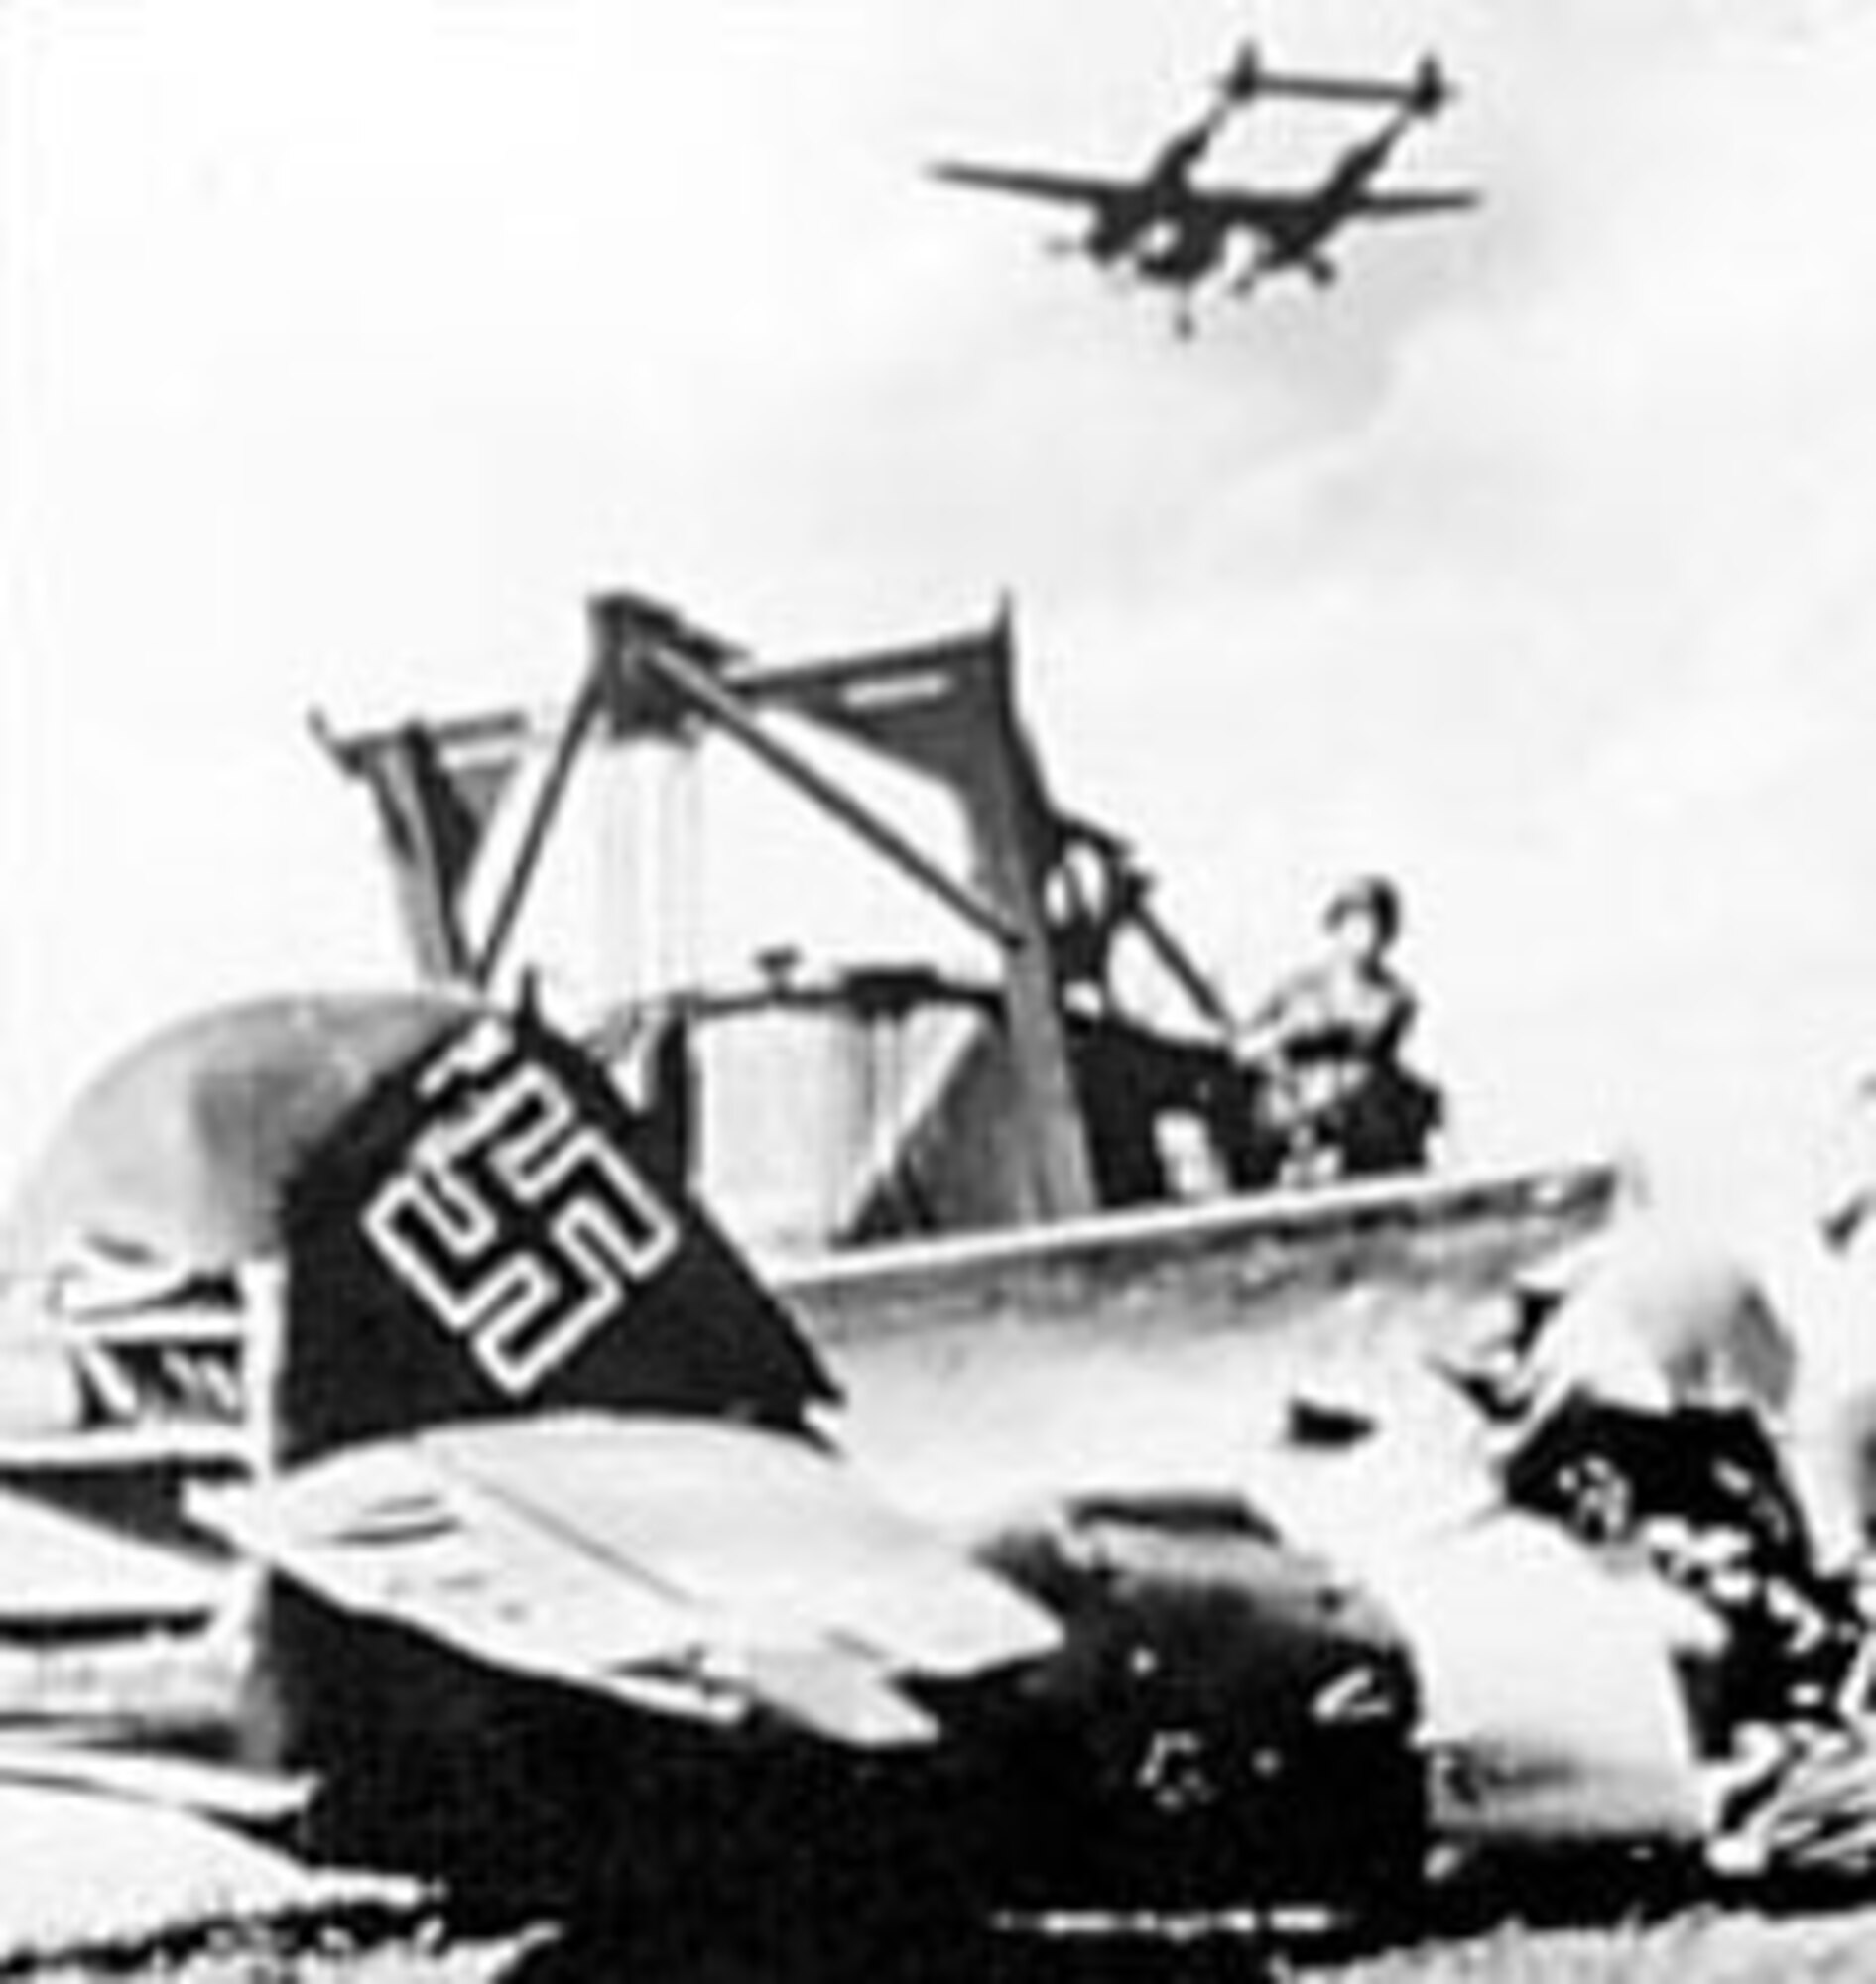 Symbolic of the Nazi defeat, an AAF fighter lands at a former Luftwaffe airfield as an Me-109 is pushed aside. (U.S. Air Force photo)